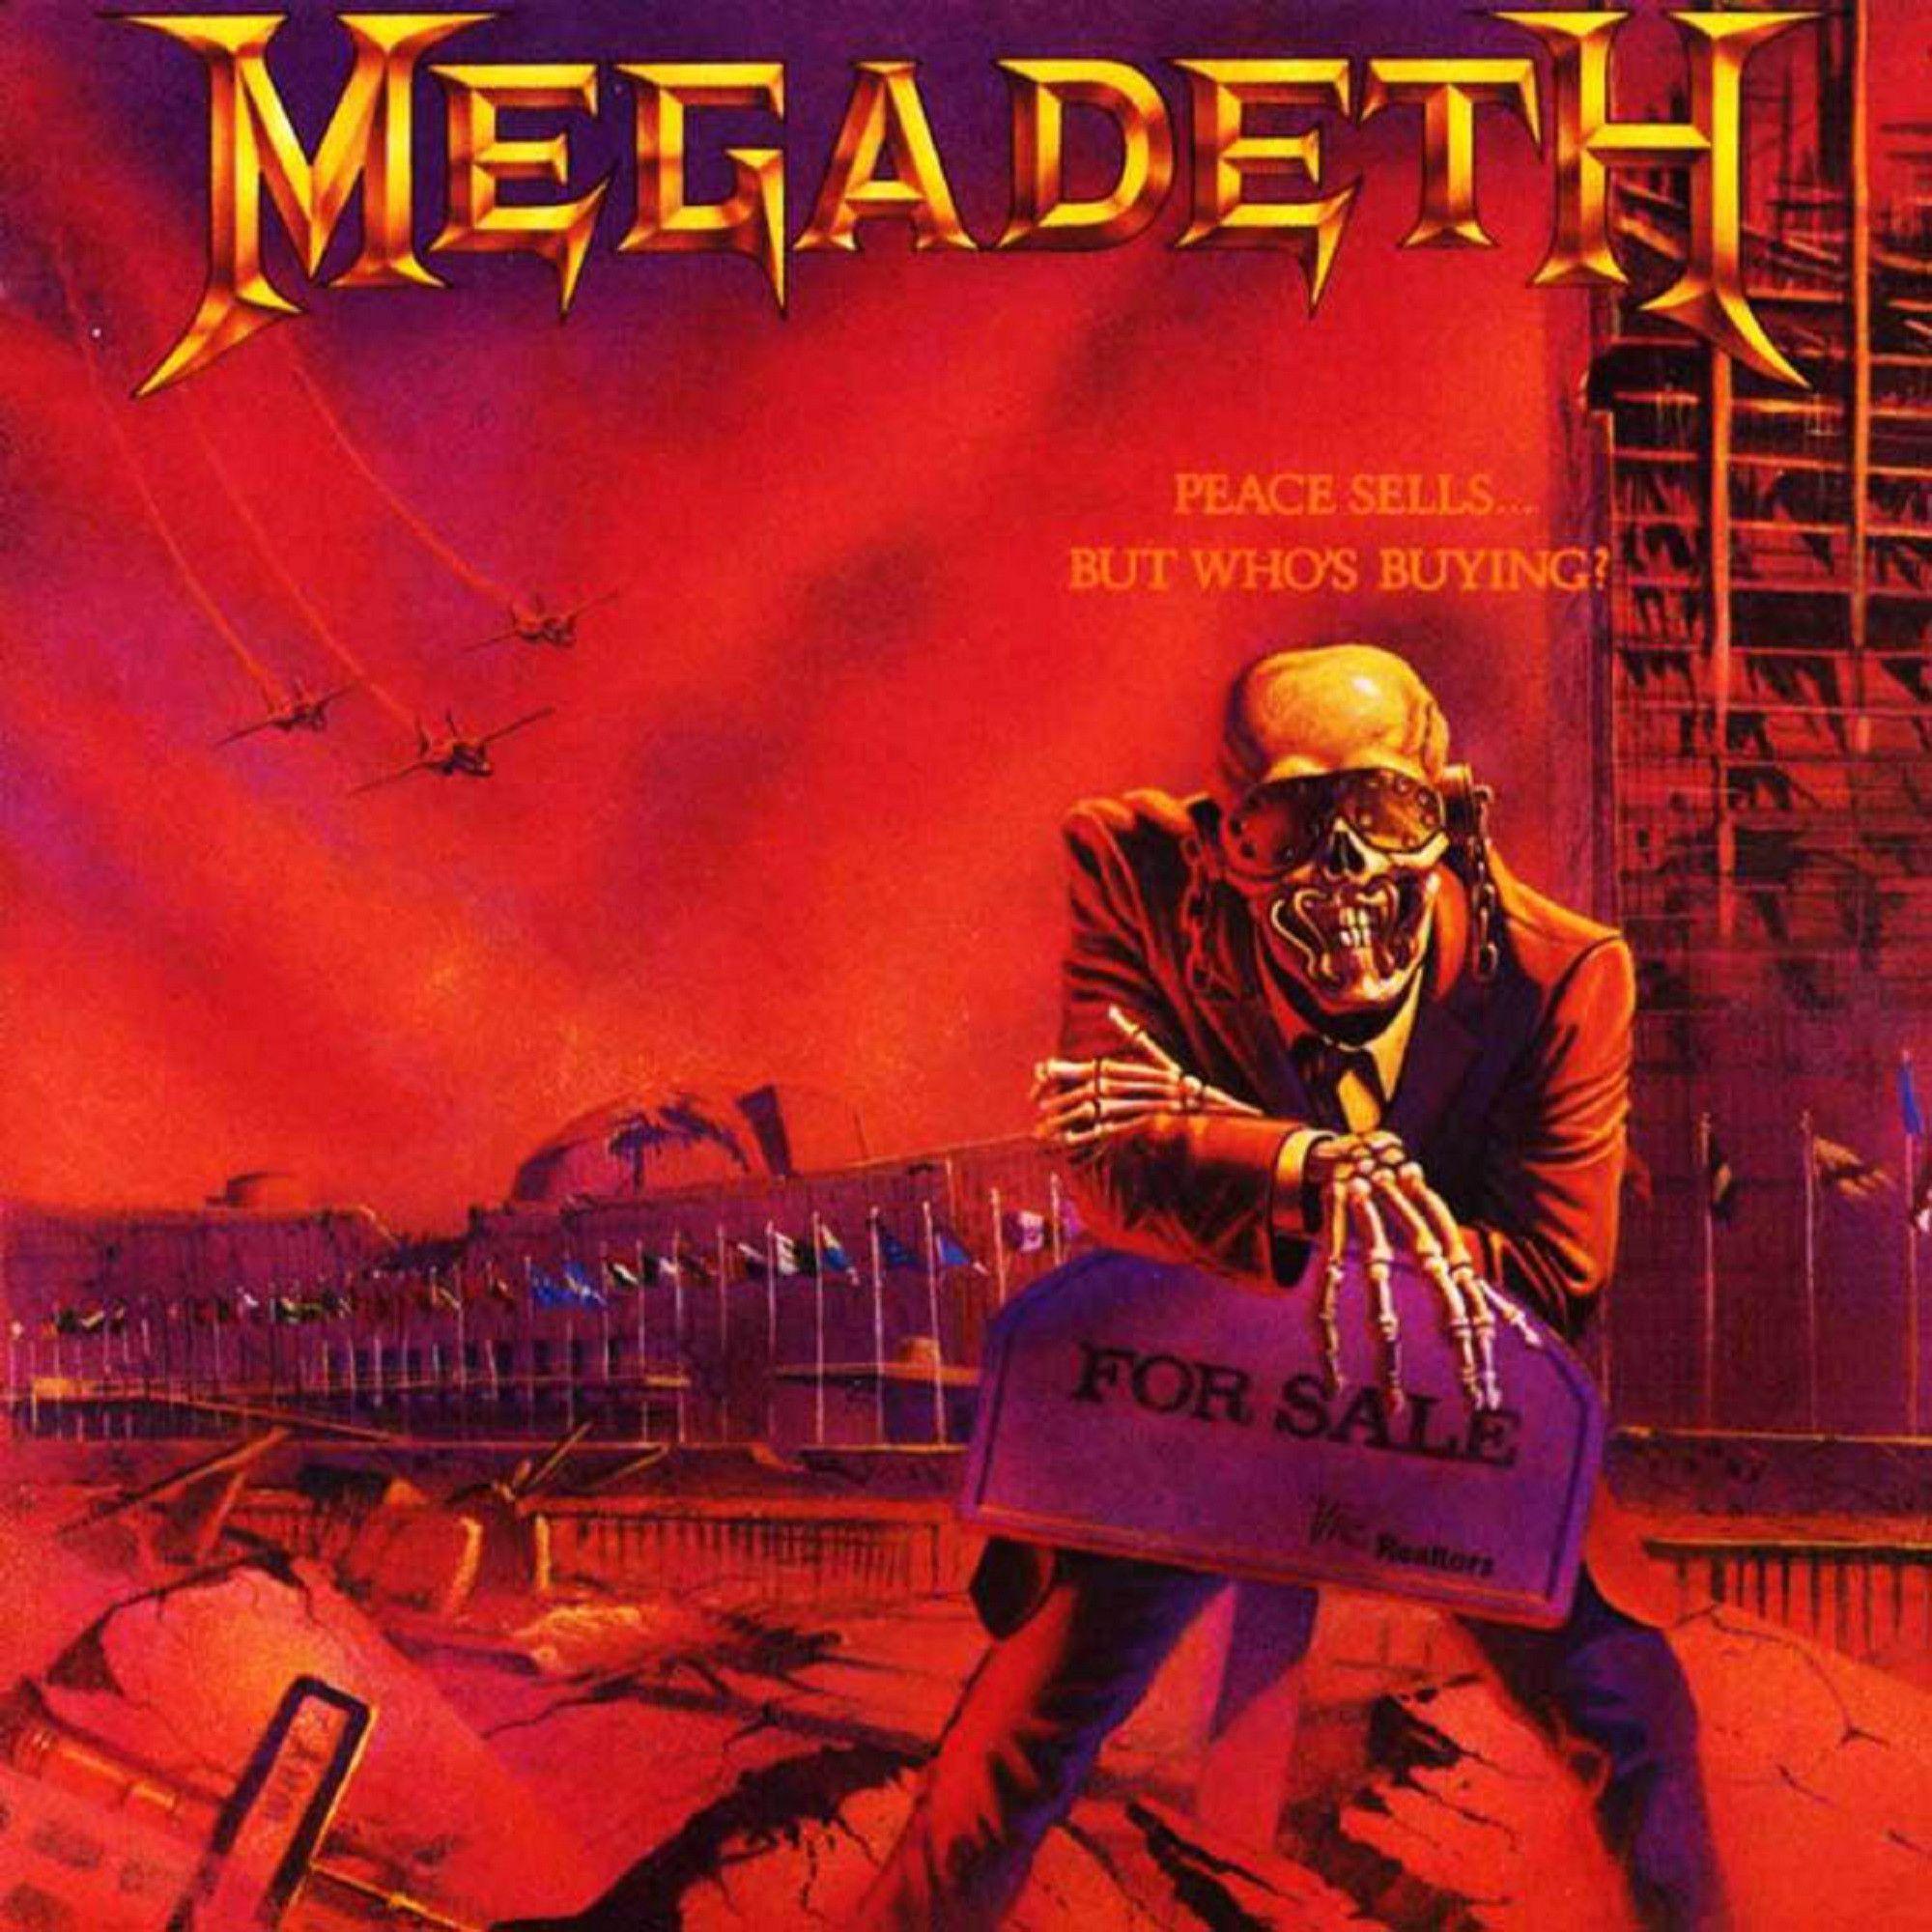 Megadeth Sells But Who's Buying. Megadeth and Soundtrack